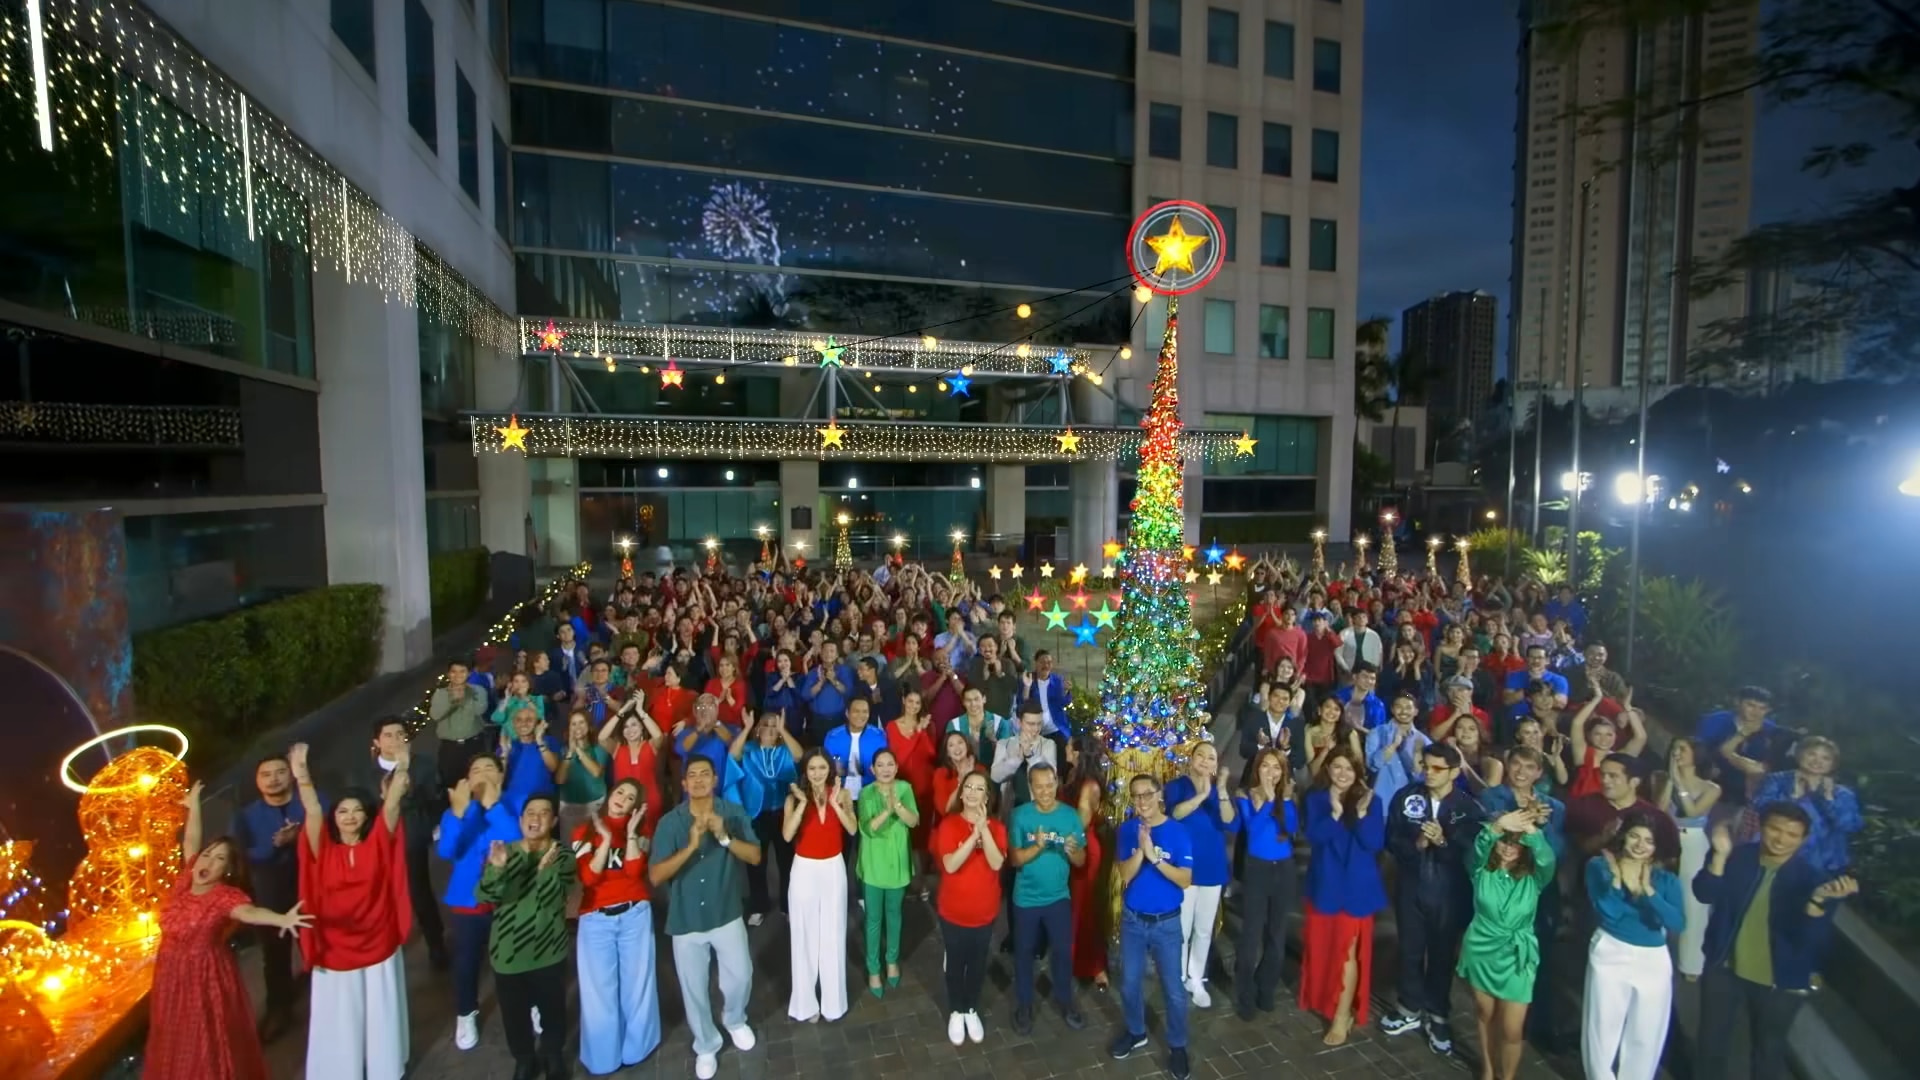 ABS-CBN Christmas Station ID “Pasko Ang Pinakamagandang Kwento” features GMA Network, TV5, And A2Z in historic music video